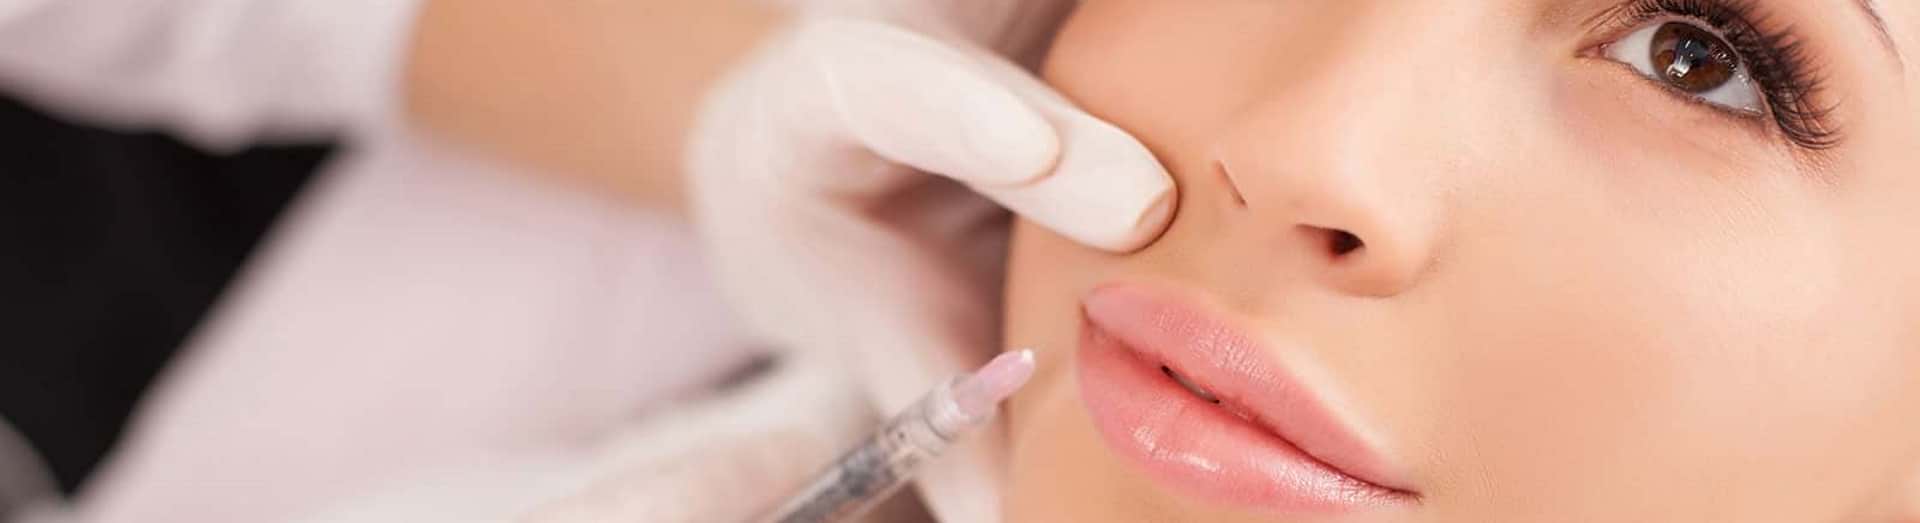 Injectables Image